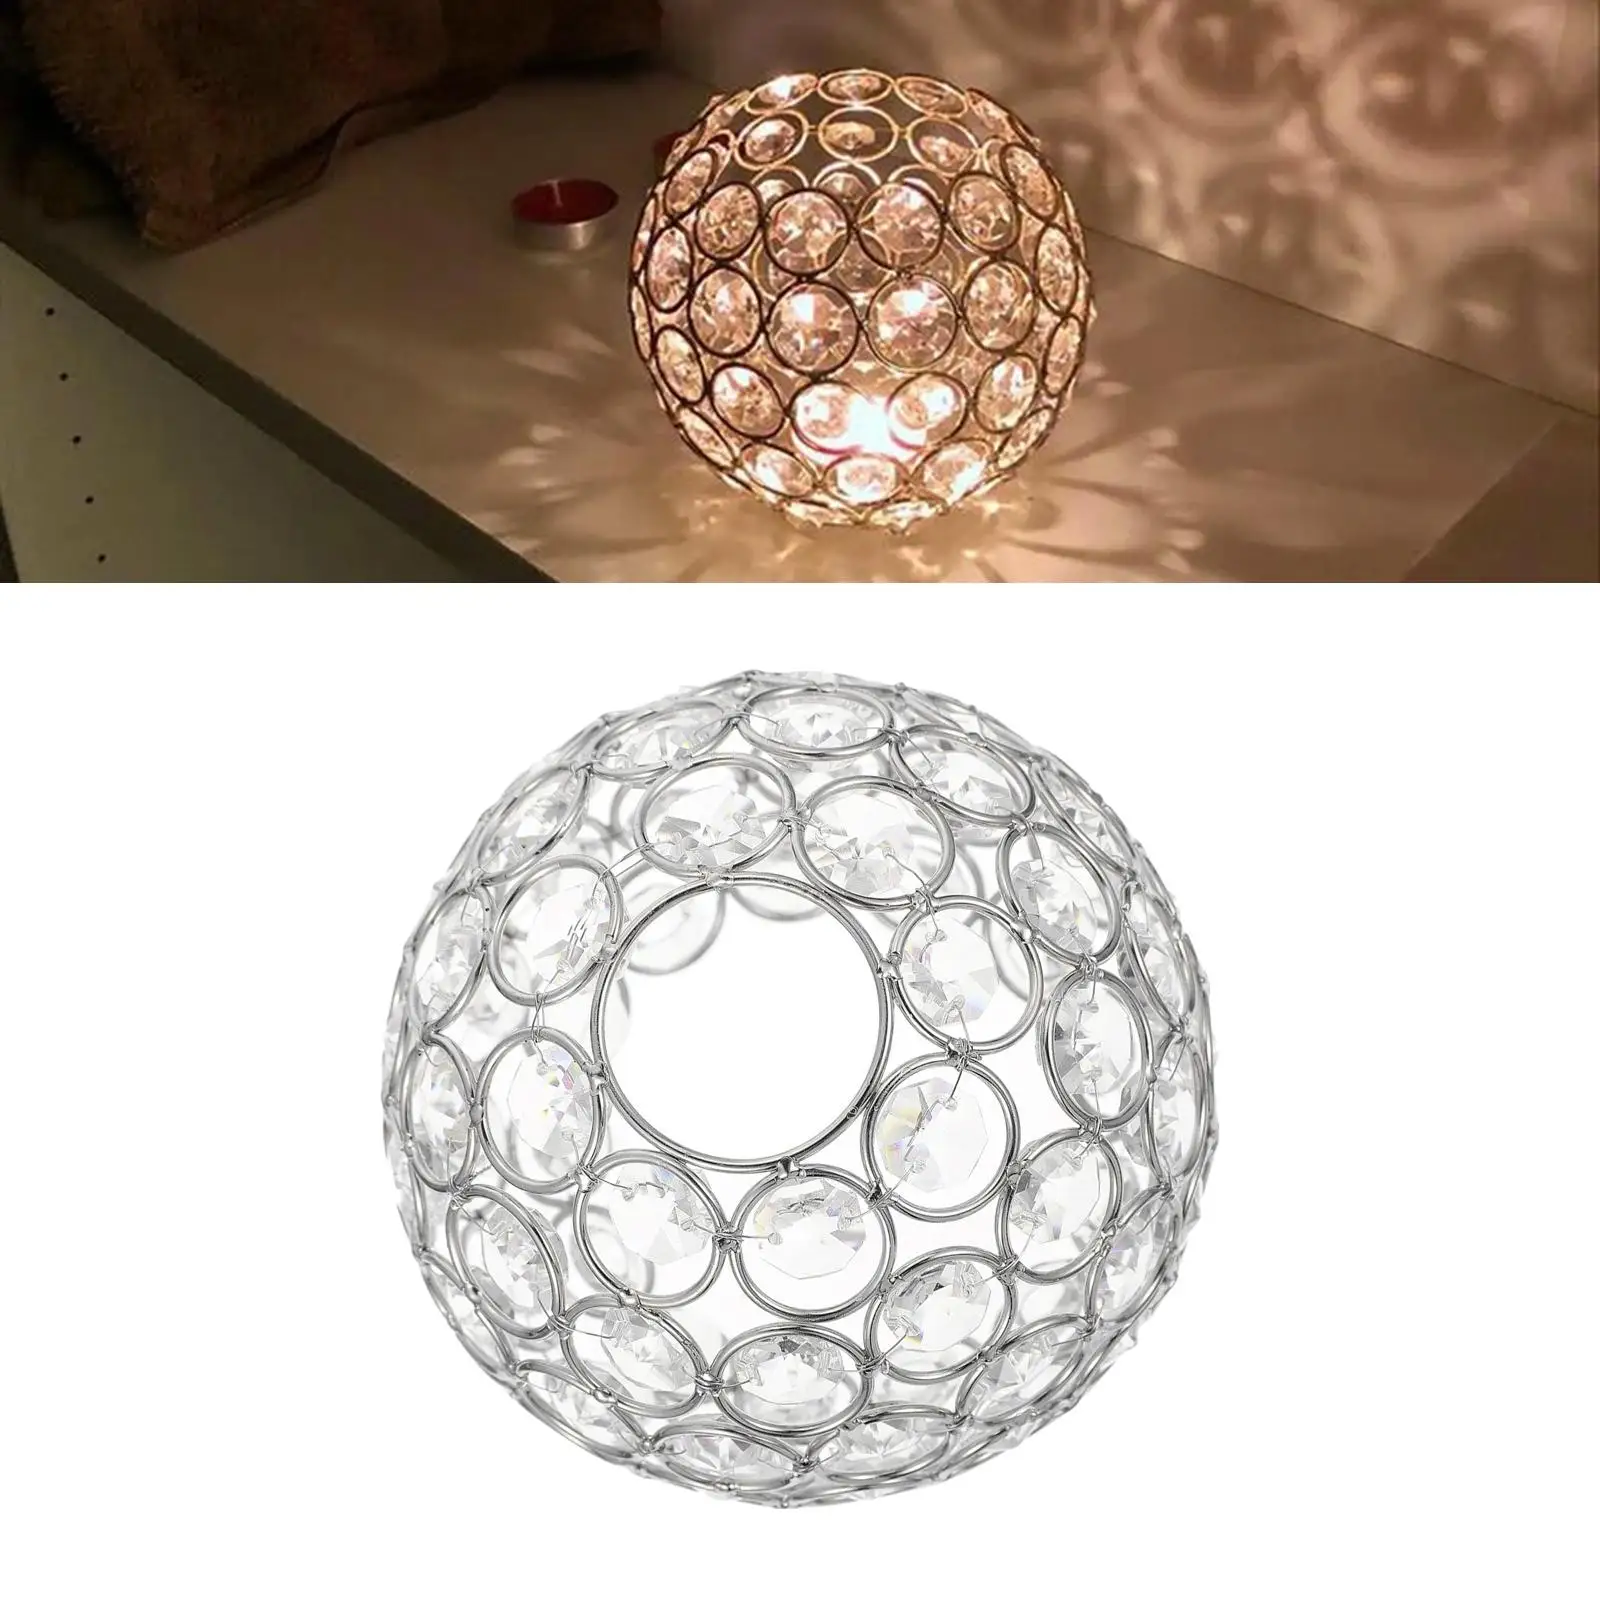 Clip On Ceiling Light Shade Replacement Cover Bathroom Crystal Lampshade